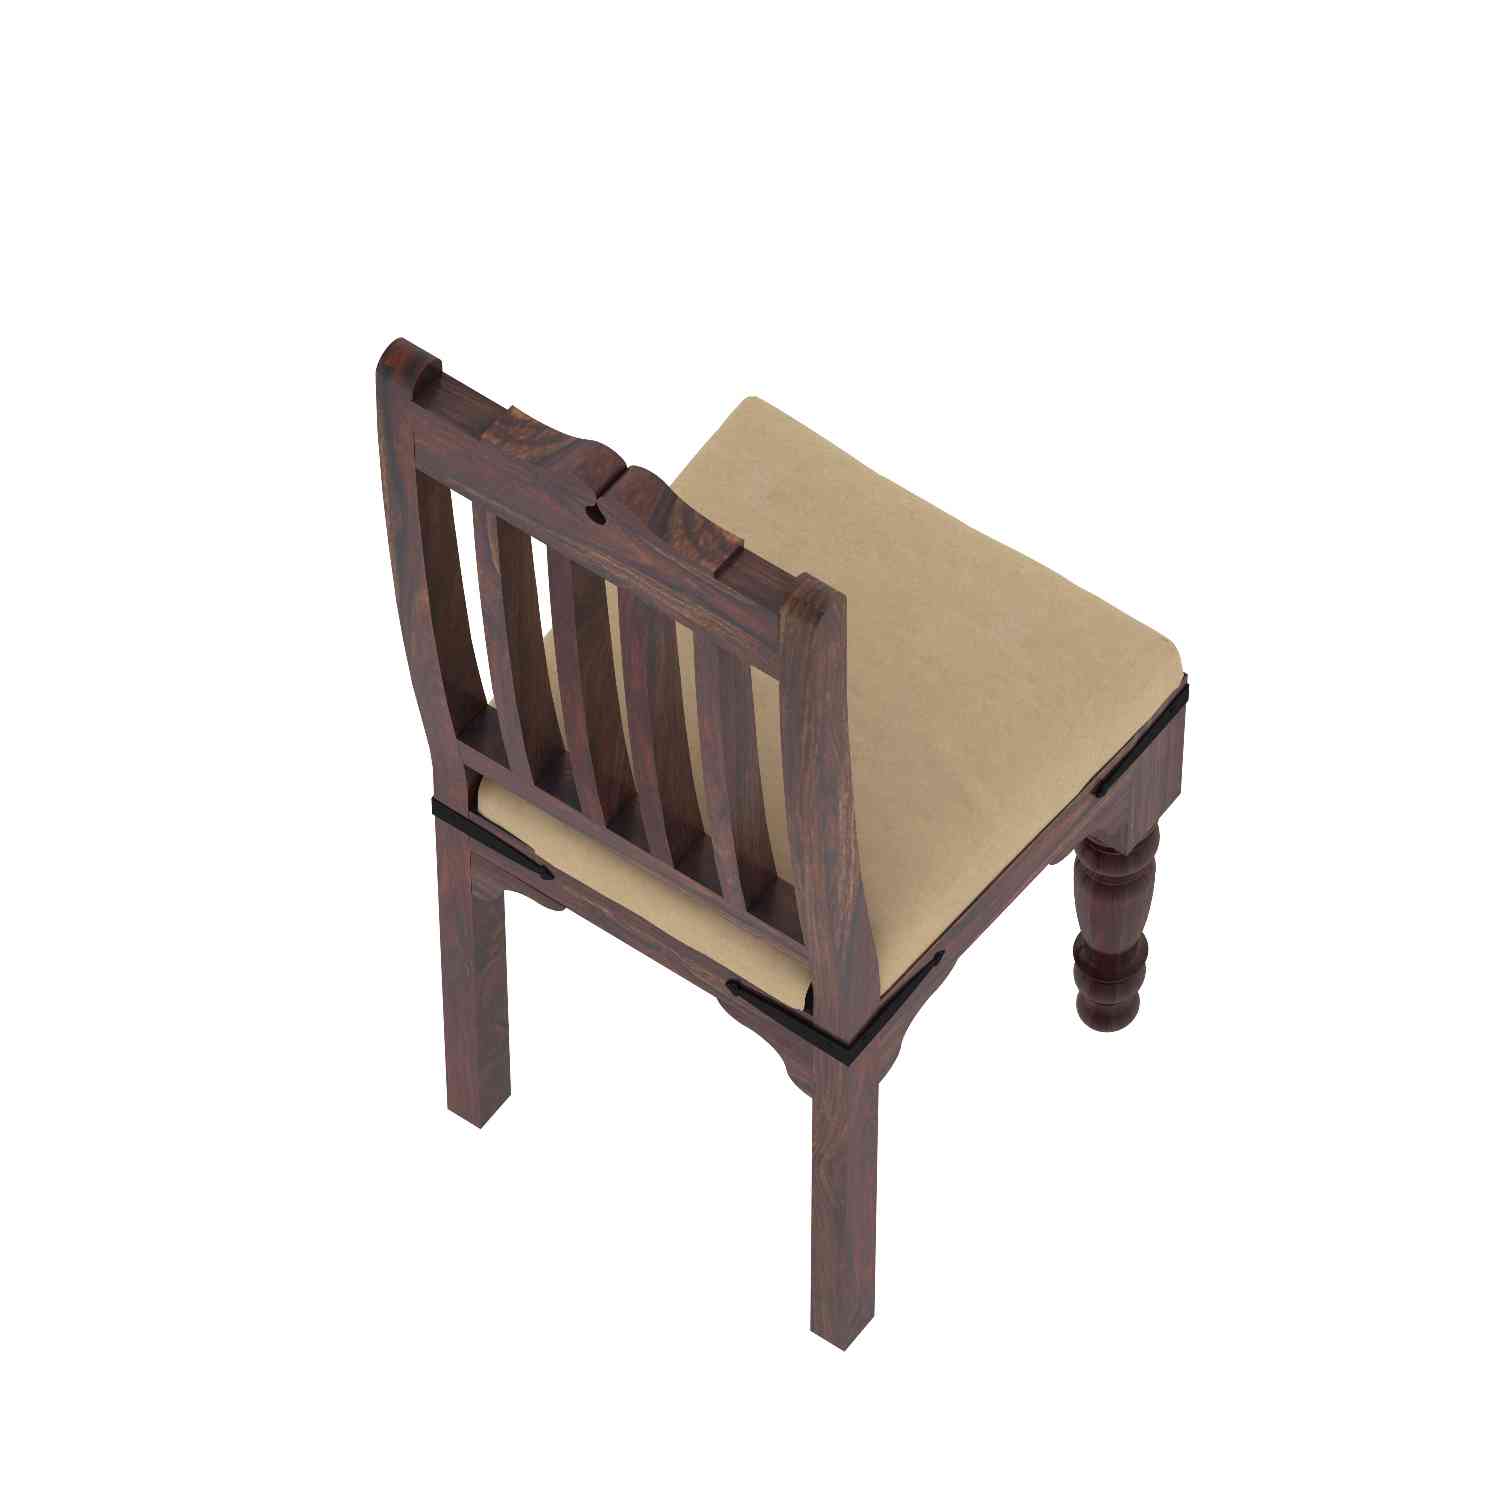 Ajmer Solid Sheesham Wood 8 Seater Dining Set With Bench (With Cushion, Walnut Finish)